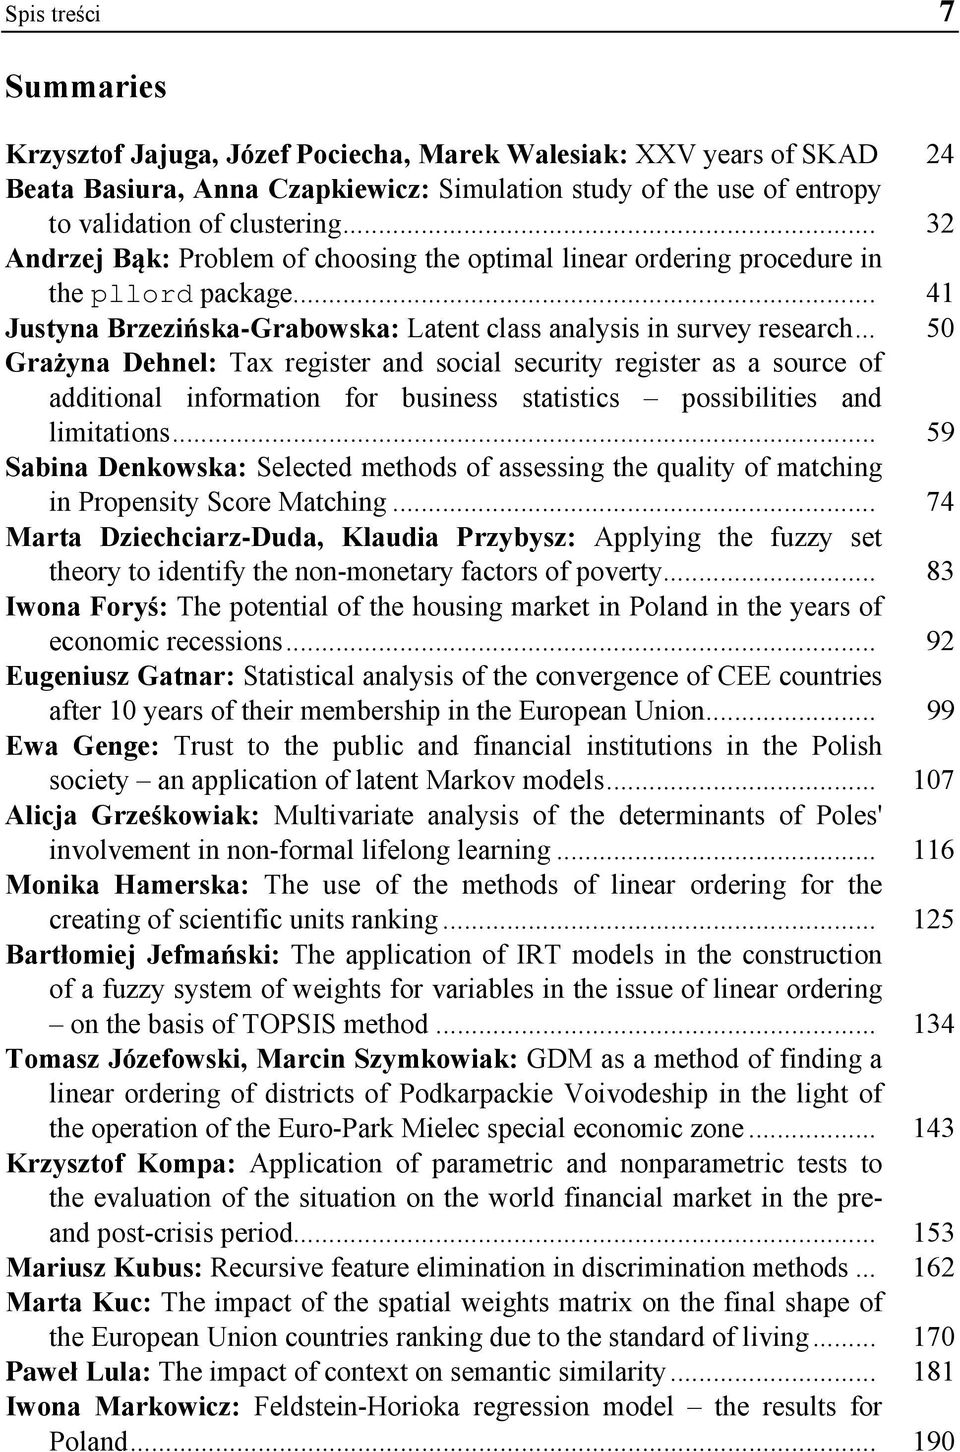 .. 59 Selected methods o assessing the uality o matching in Propensity Score Matching... 74 - Applying the uzzy set theory to identi y the non-monetary actors o poverty.